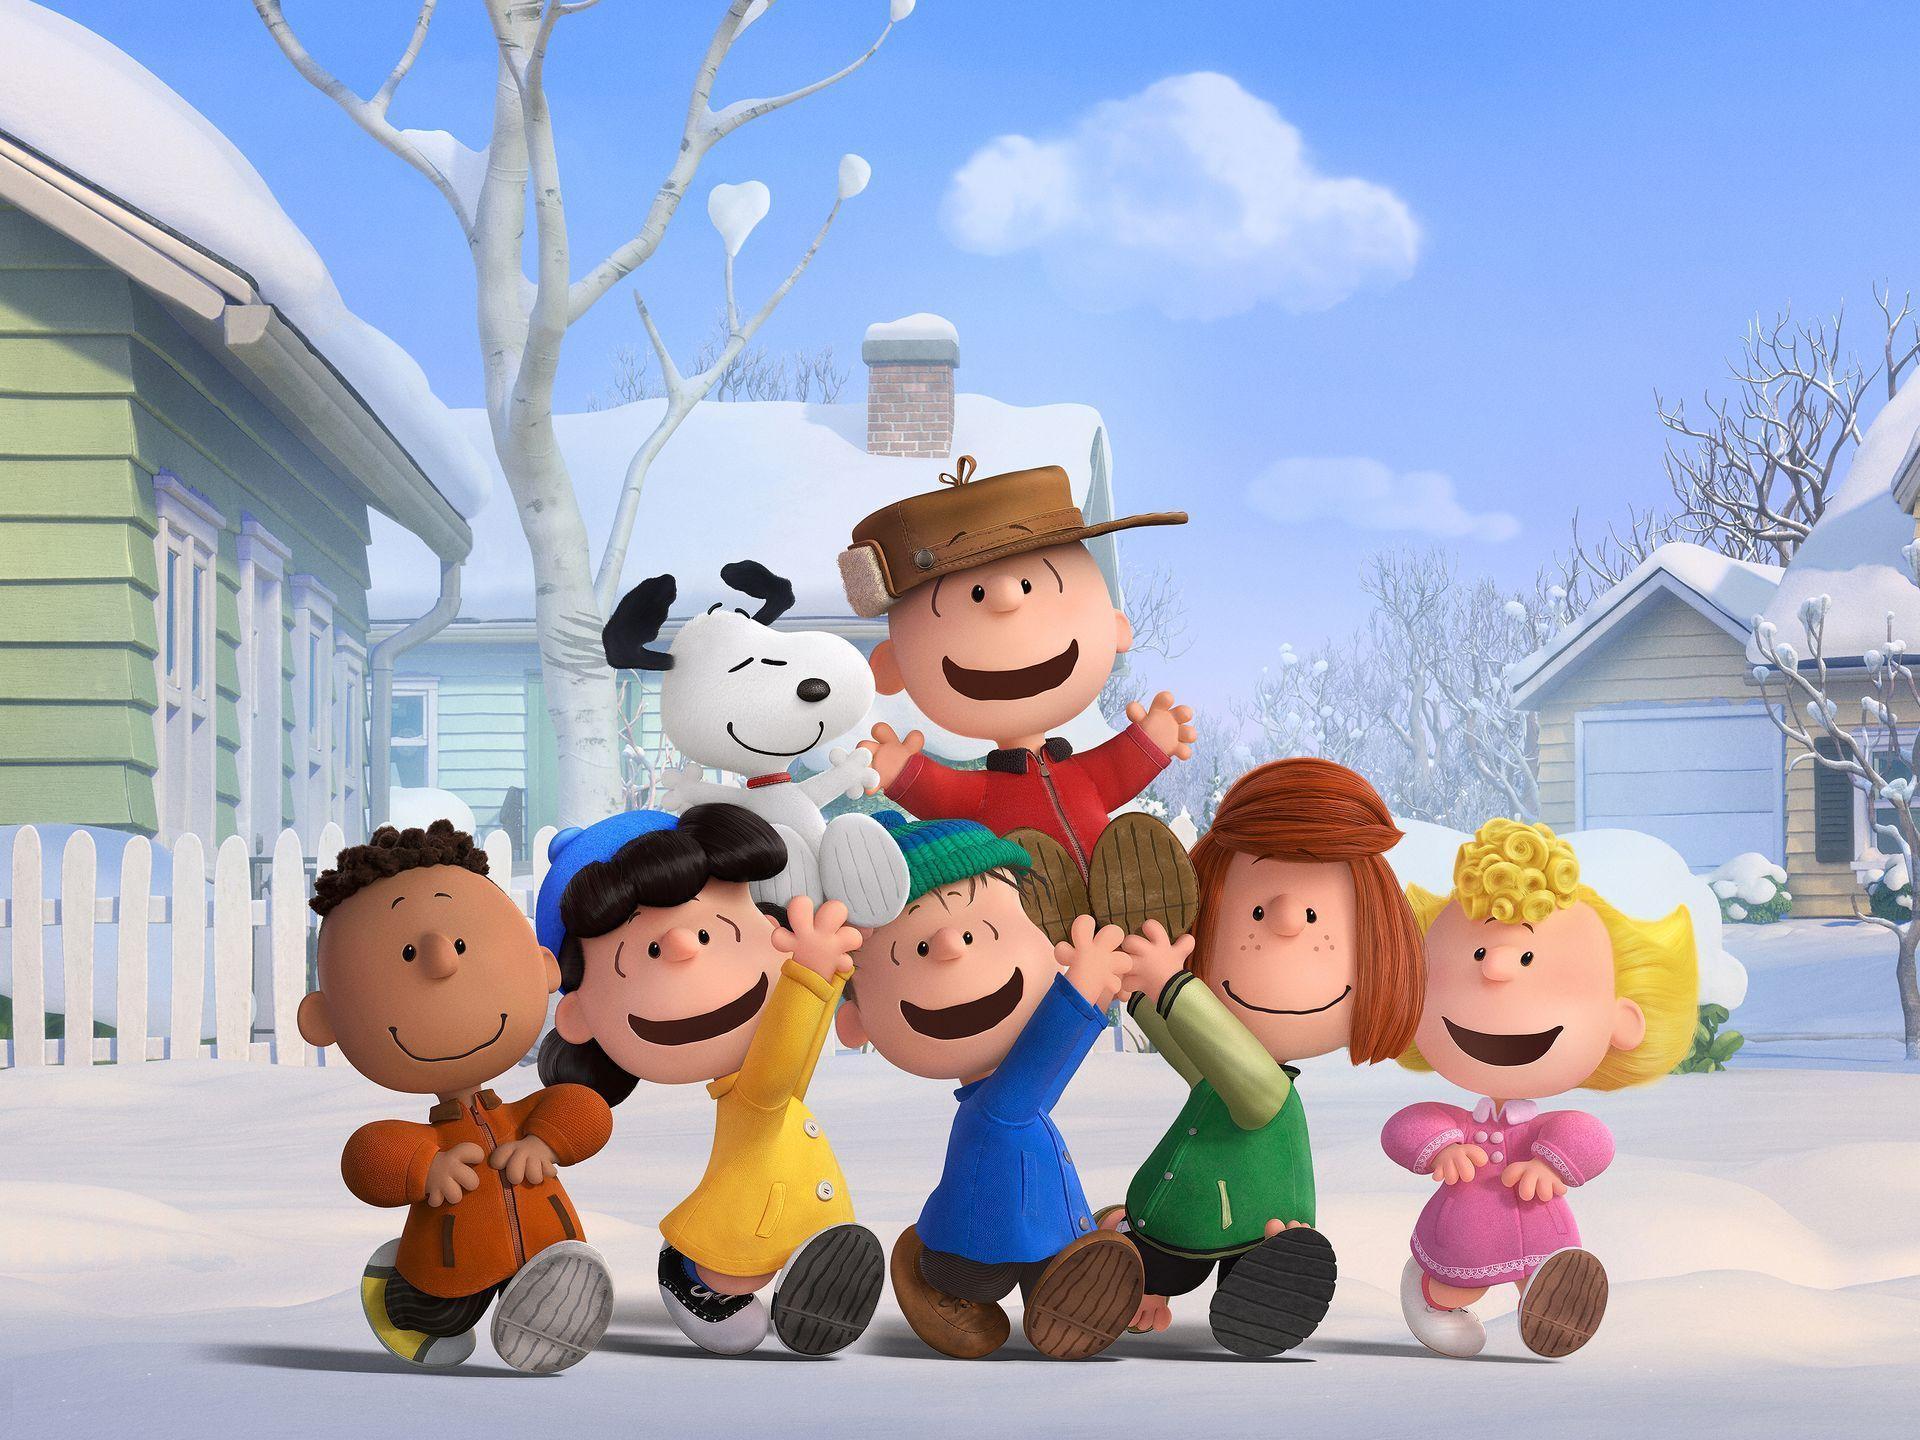 7 New Peanuts Movie Image Show off the Comics&Beloved Characters